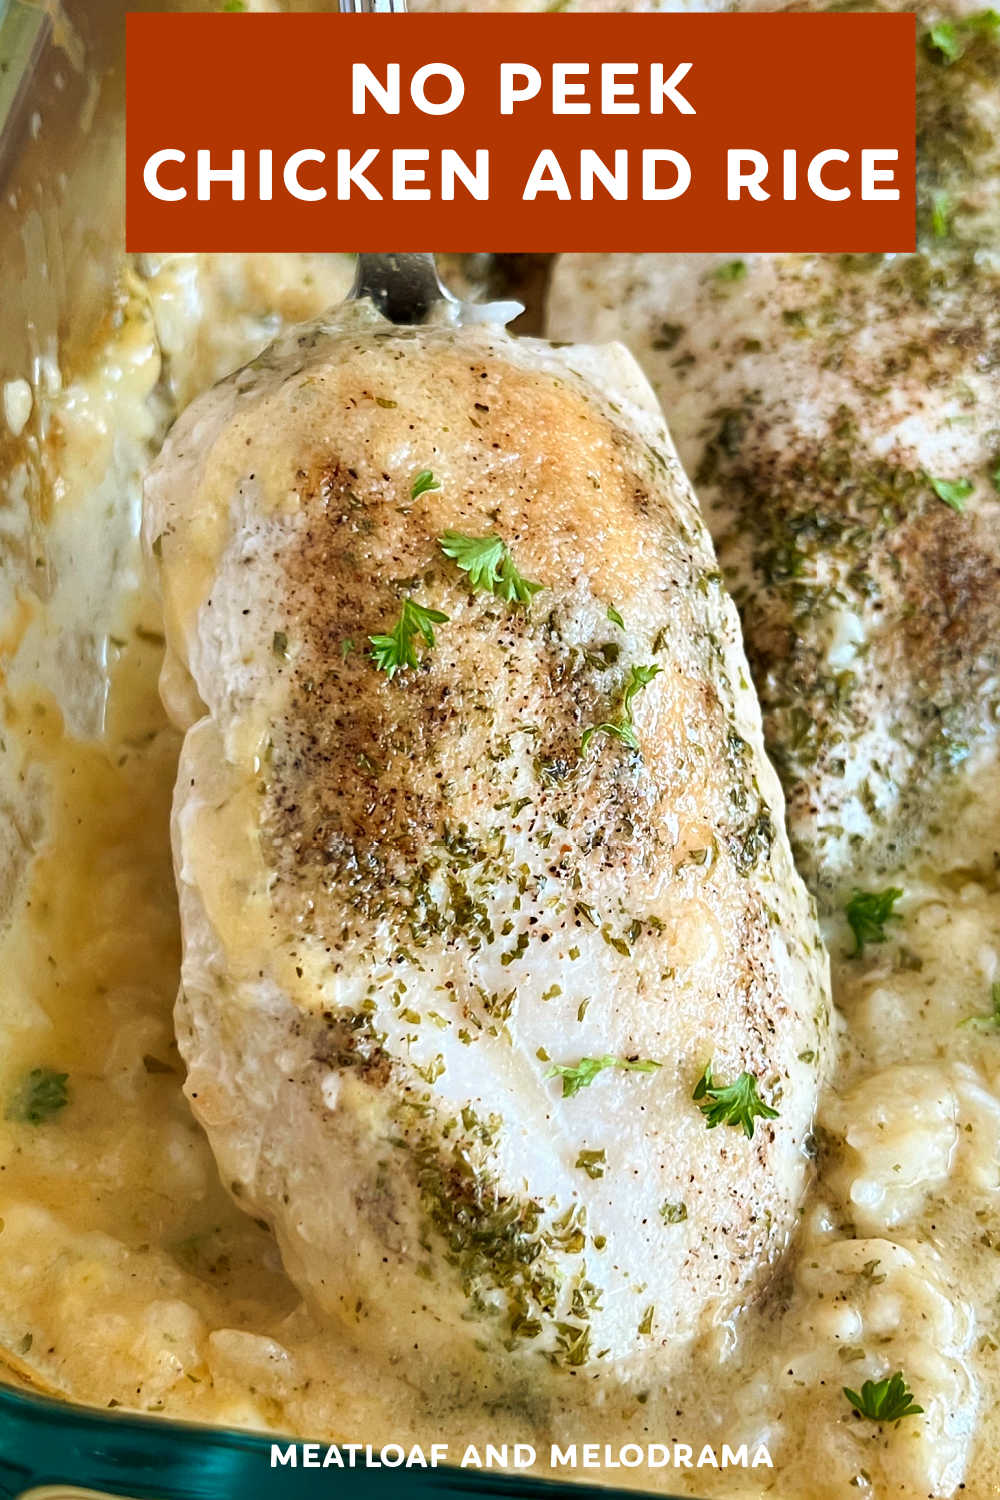 No Peek Chicken and Rice recipe is chicken breasts and rice baked together in a creamy sauce in one pan. Easy comfort food made with simple ingredients that the whole family will enjoy. This easy chicken recipe is a family favorite perfect for busy weeknights, and even picky kids love it! via @meamel